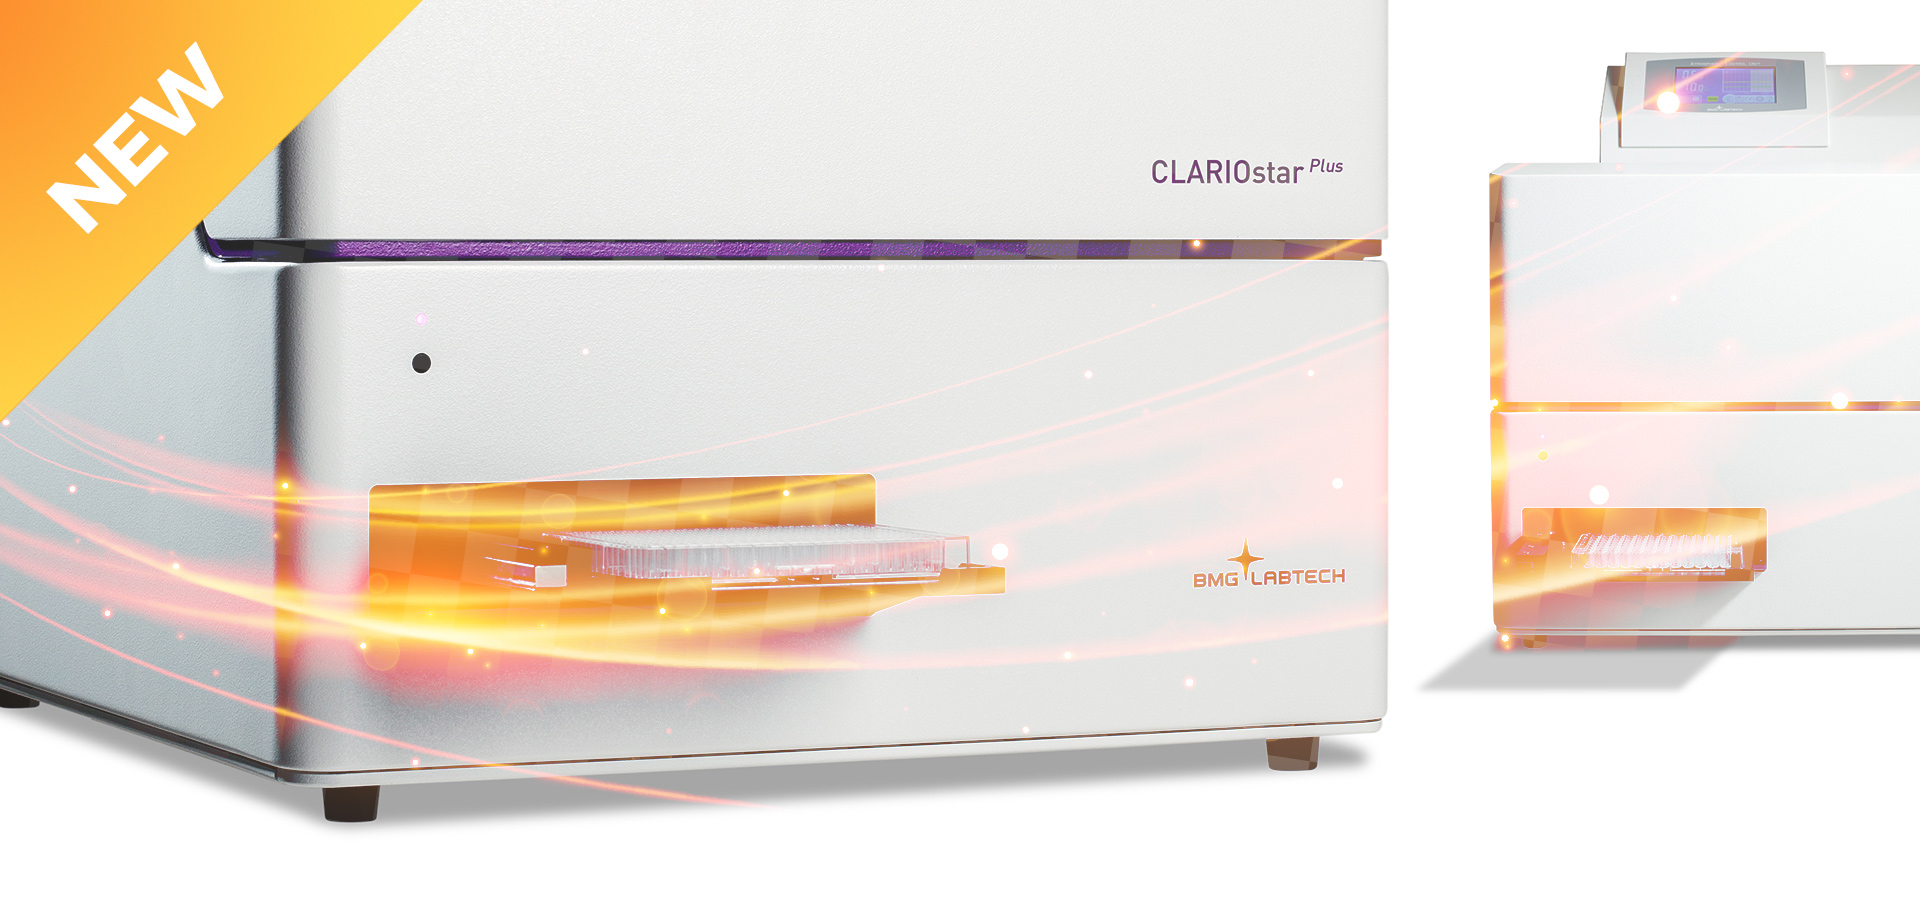 A Shimmer of Light Detected for Fluorescence Analysis – The New CLARIOSTAR Plus Microplate Reader